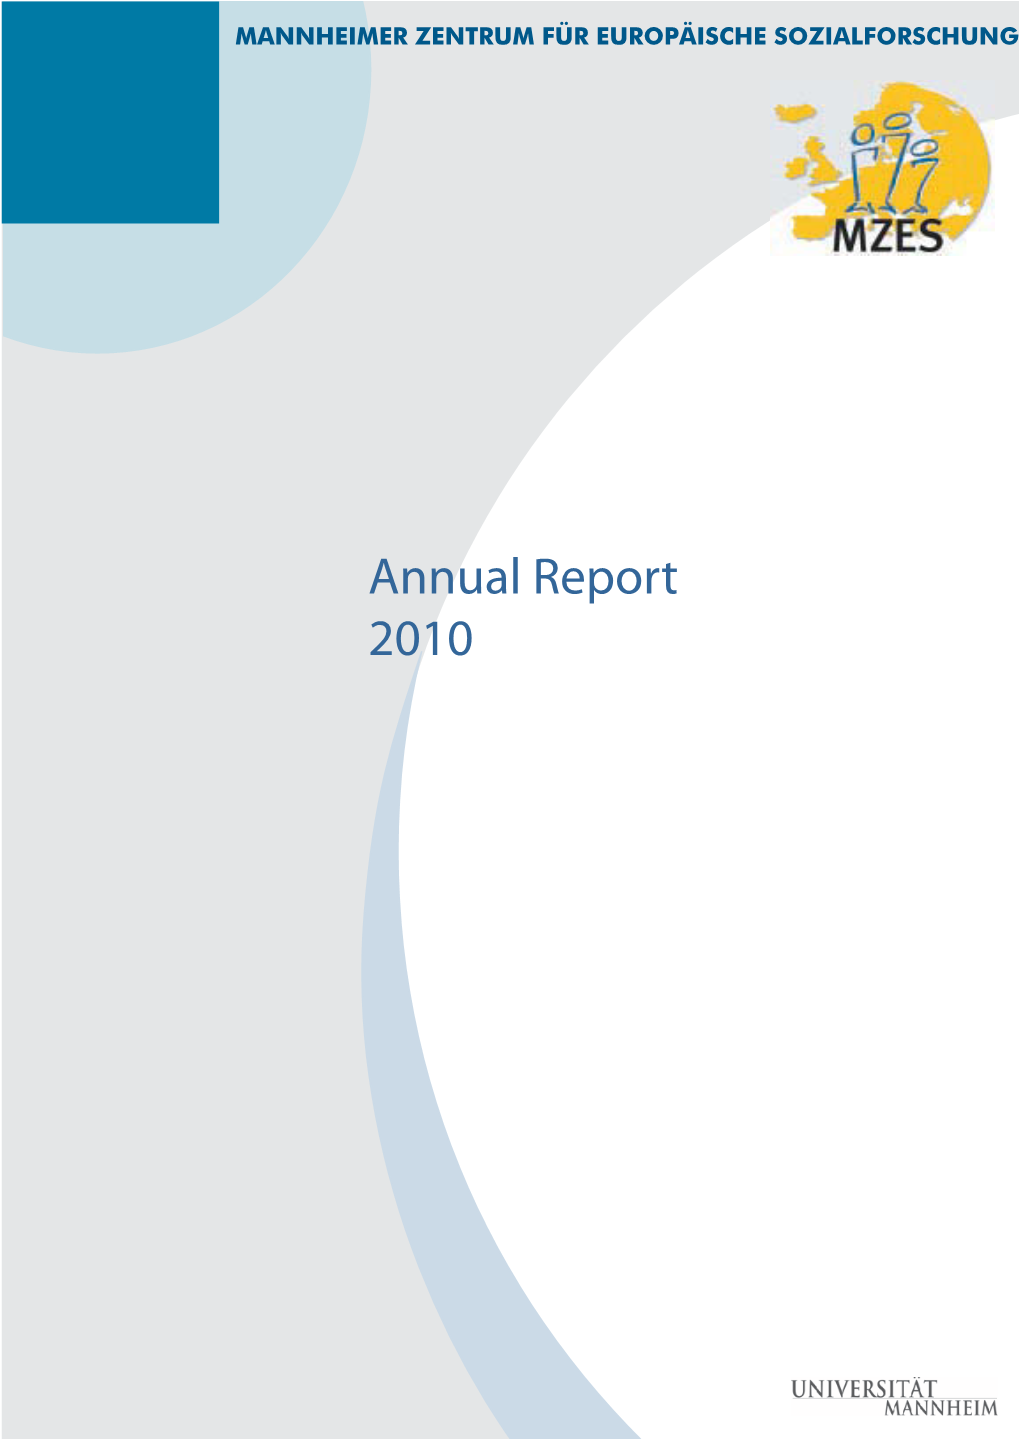 MZES Annual Report 2010